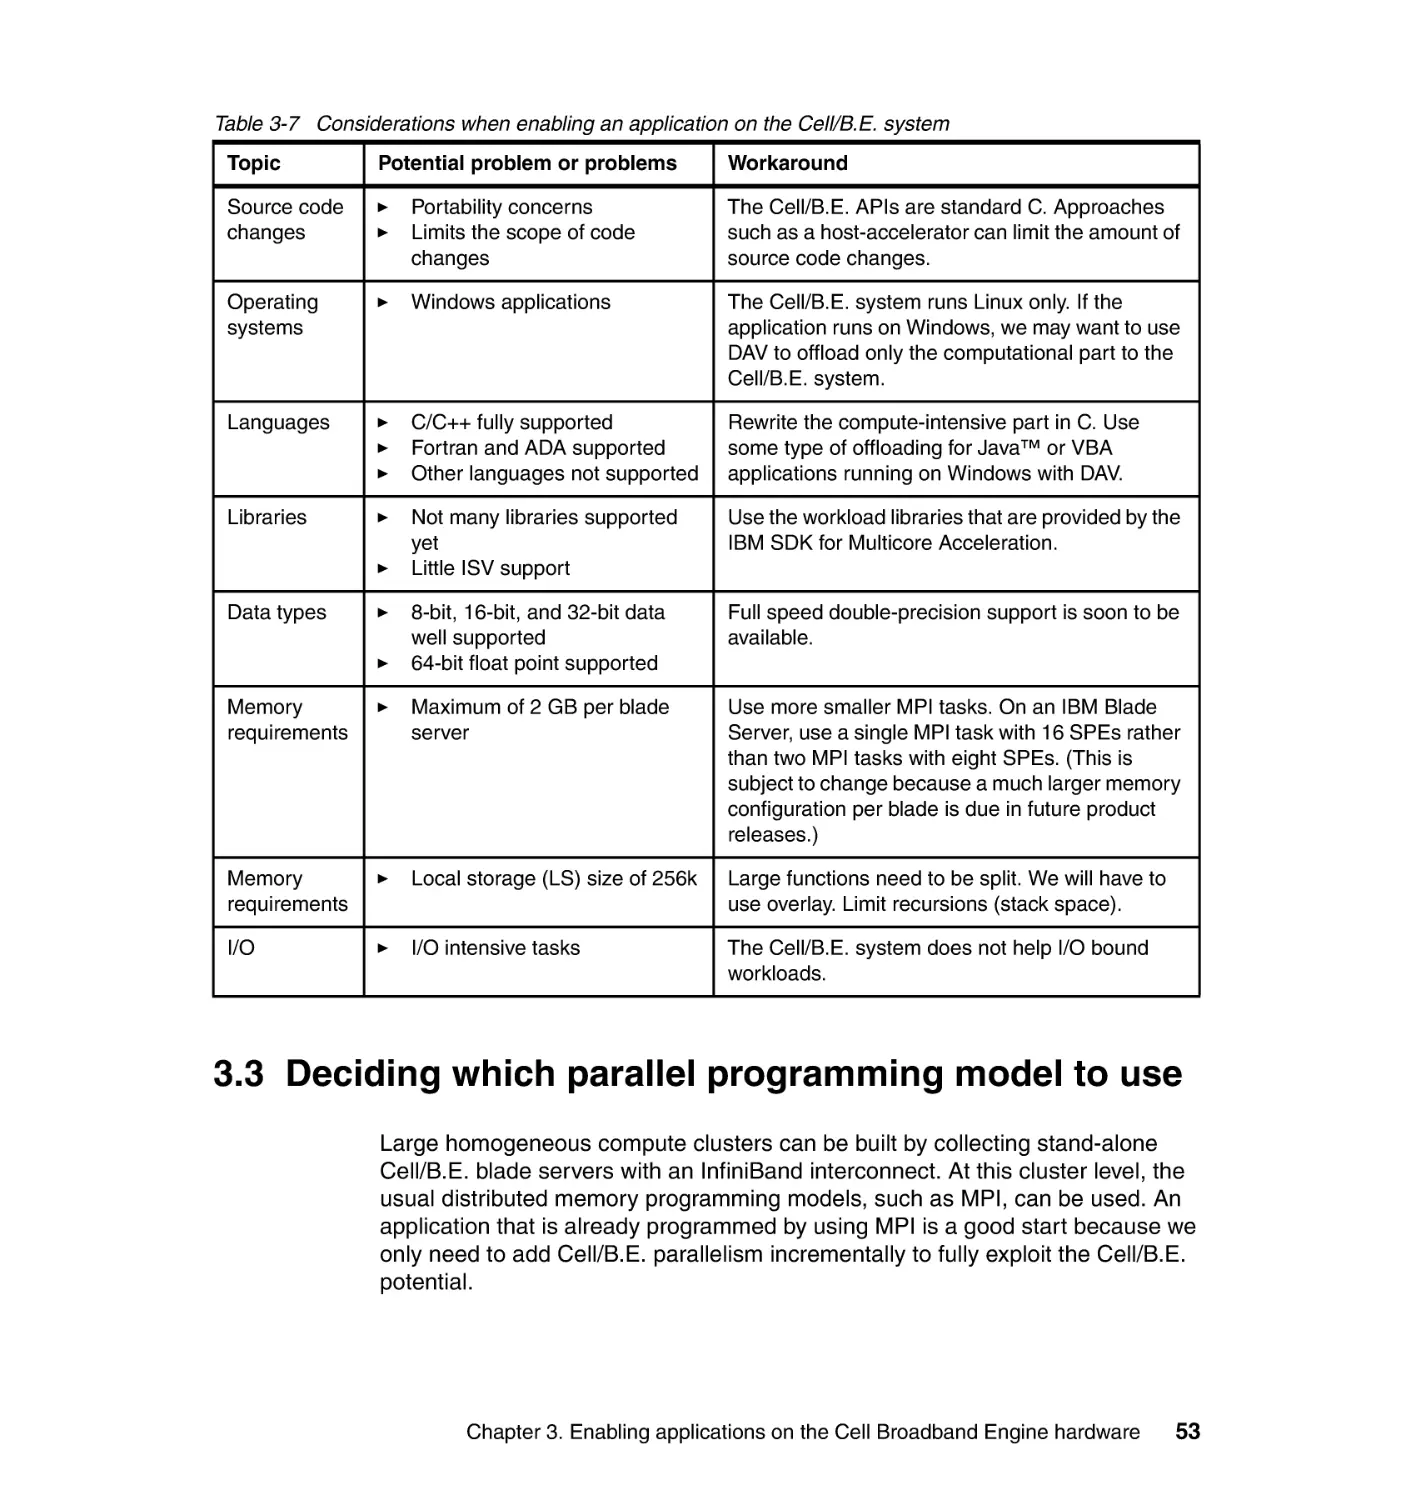 3.3 Deciding which parallel programming model to use